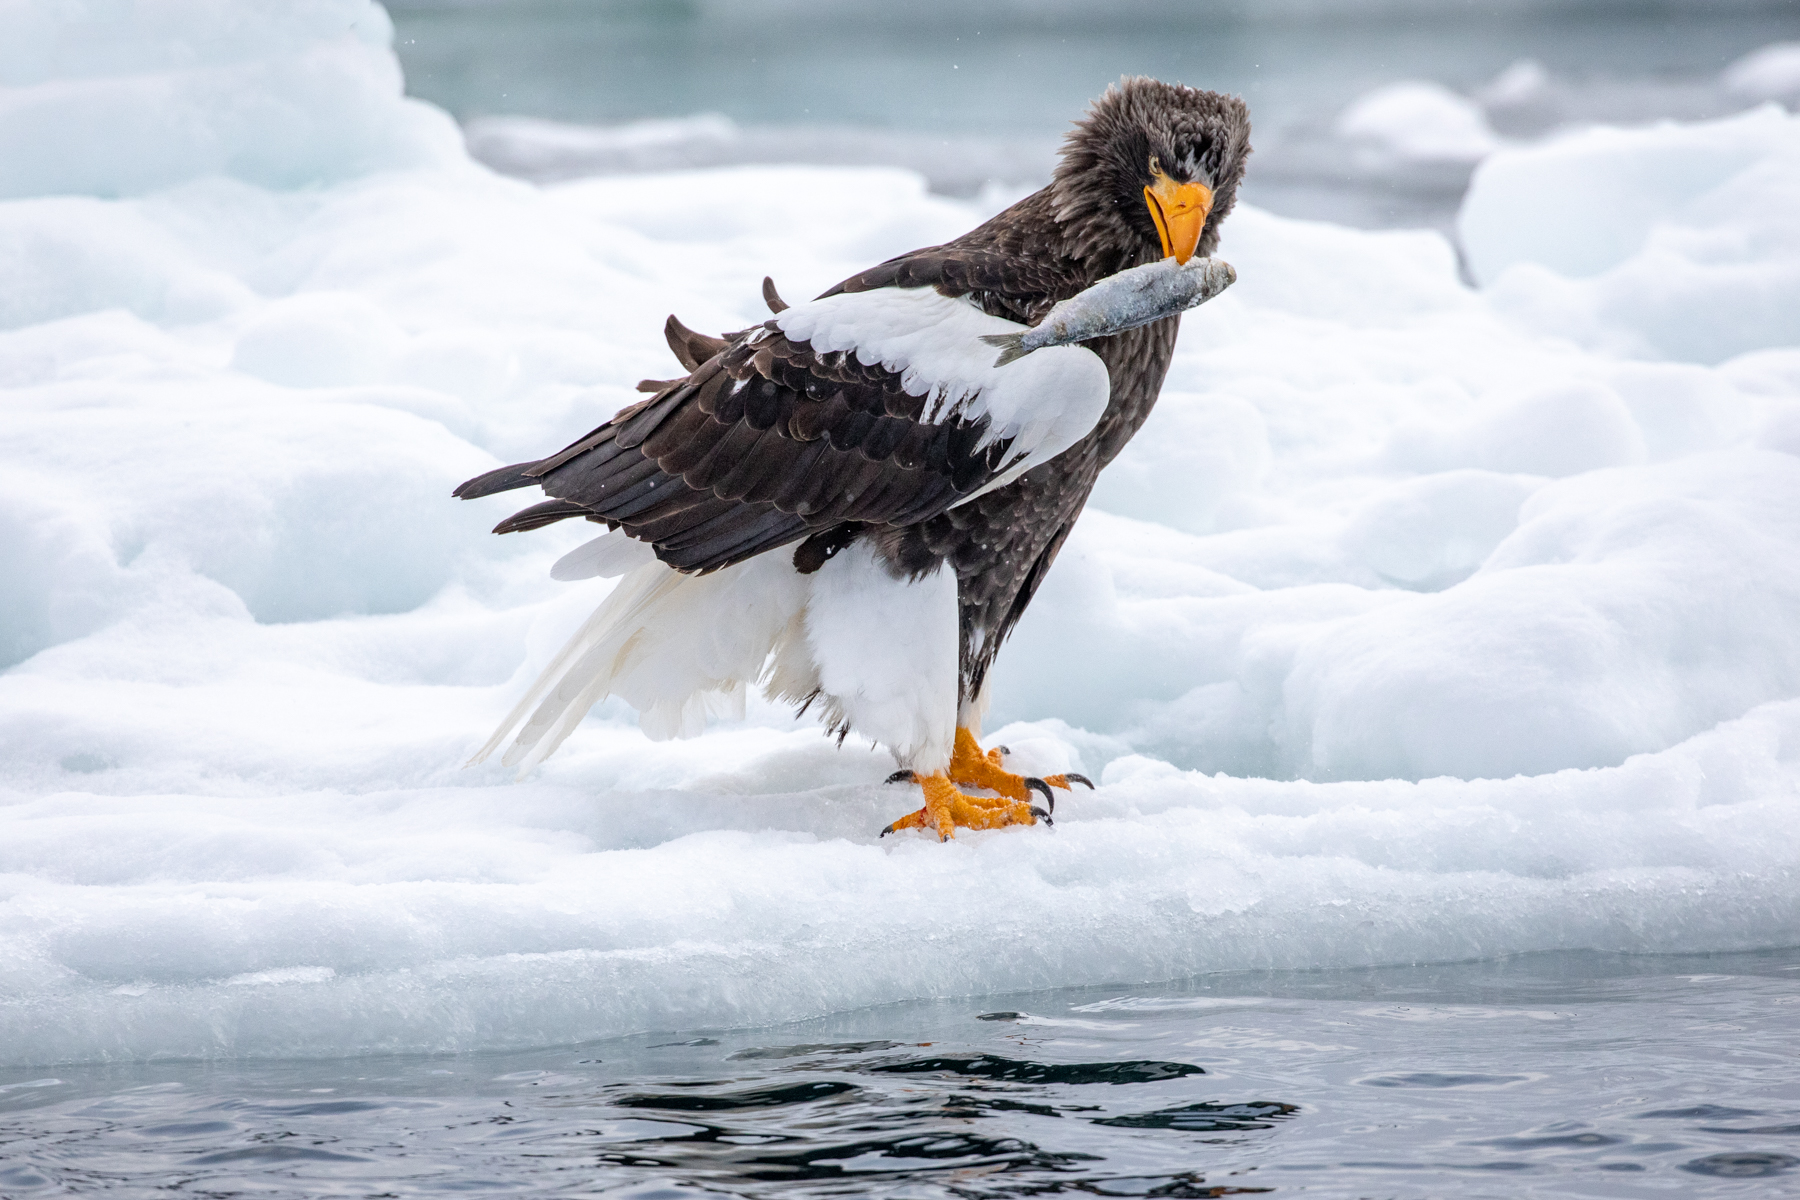 Steller's Sea Eagle with fish (image by Mark Beaman)